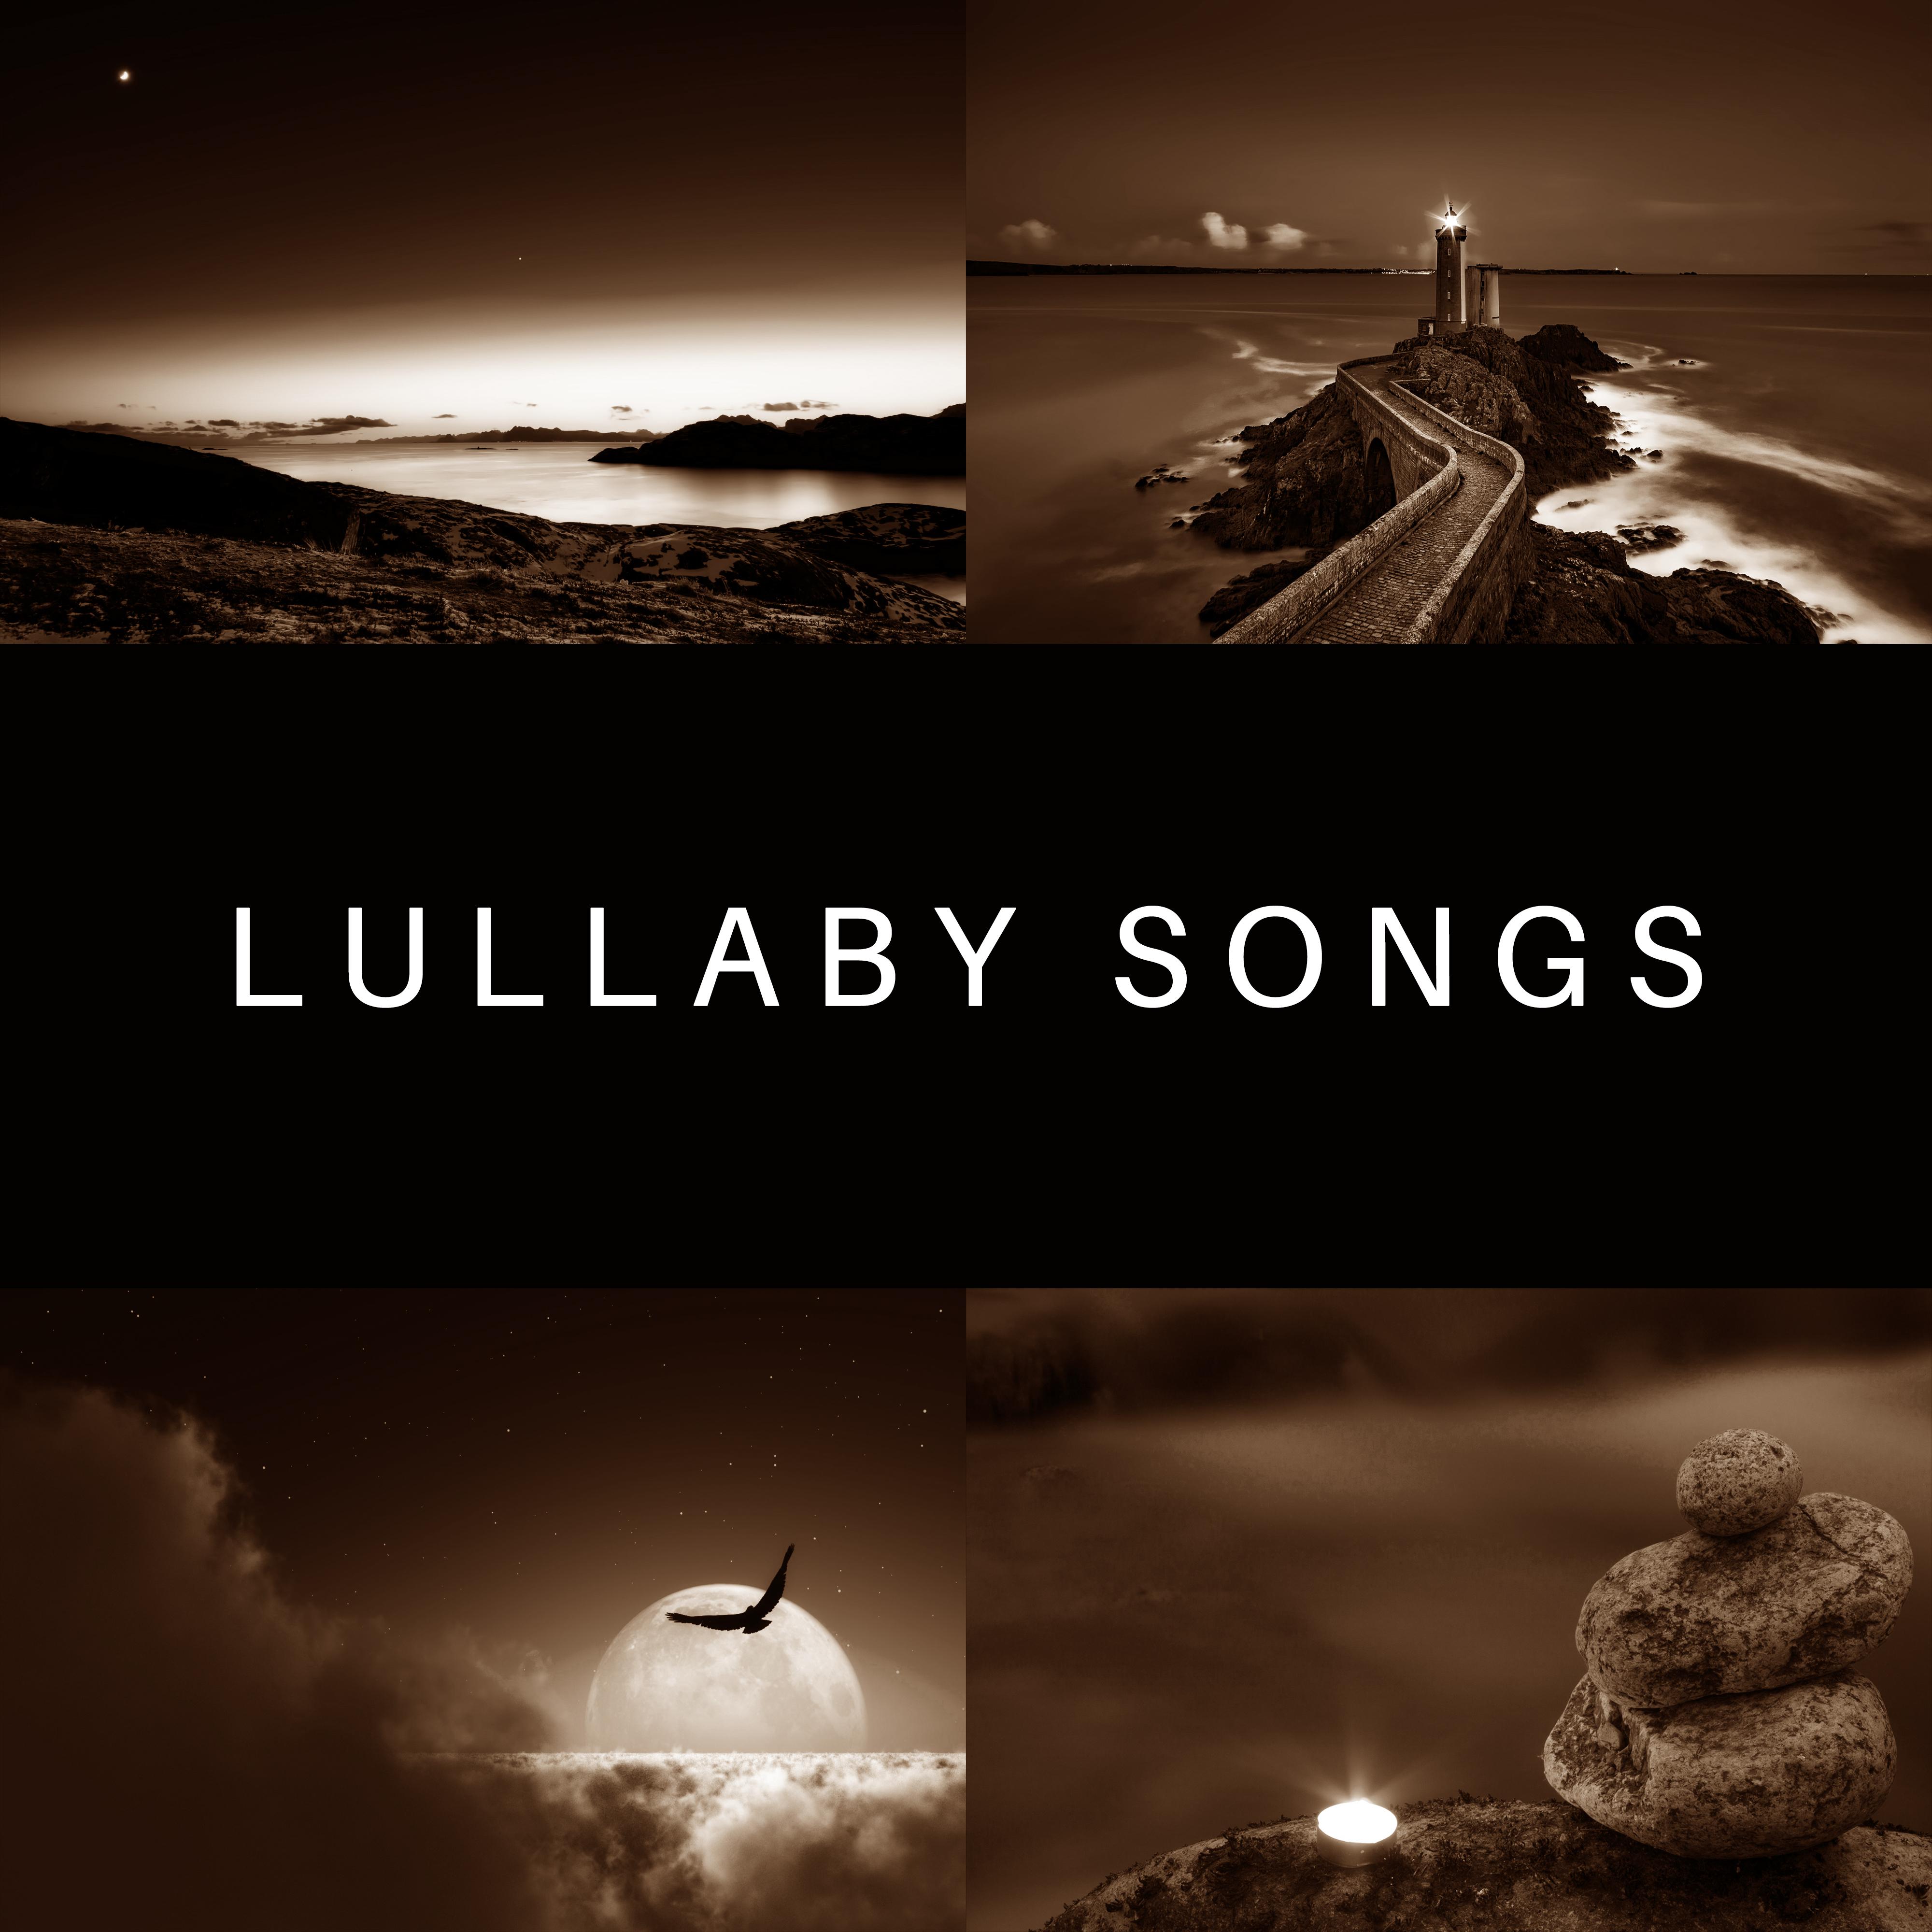 Lullaby Songs  Pure Nature Sounds, Relaxation  Meditation, Sleep Music, Lullabies